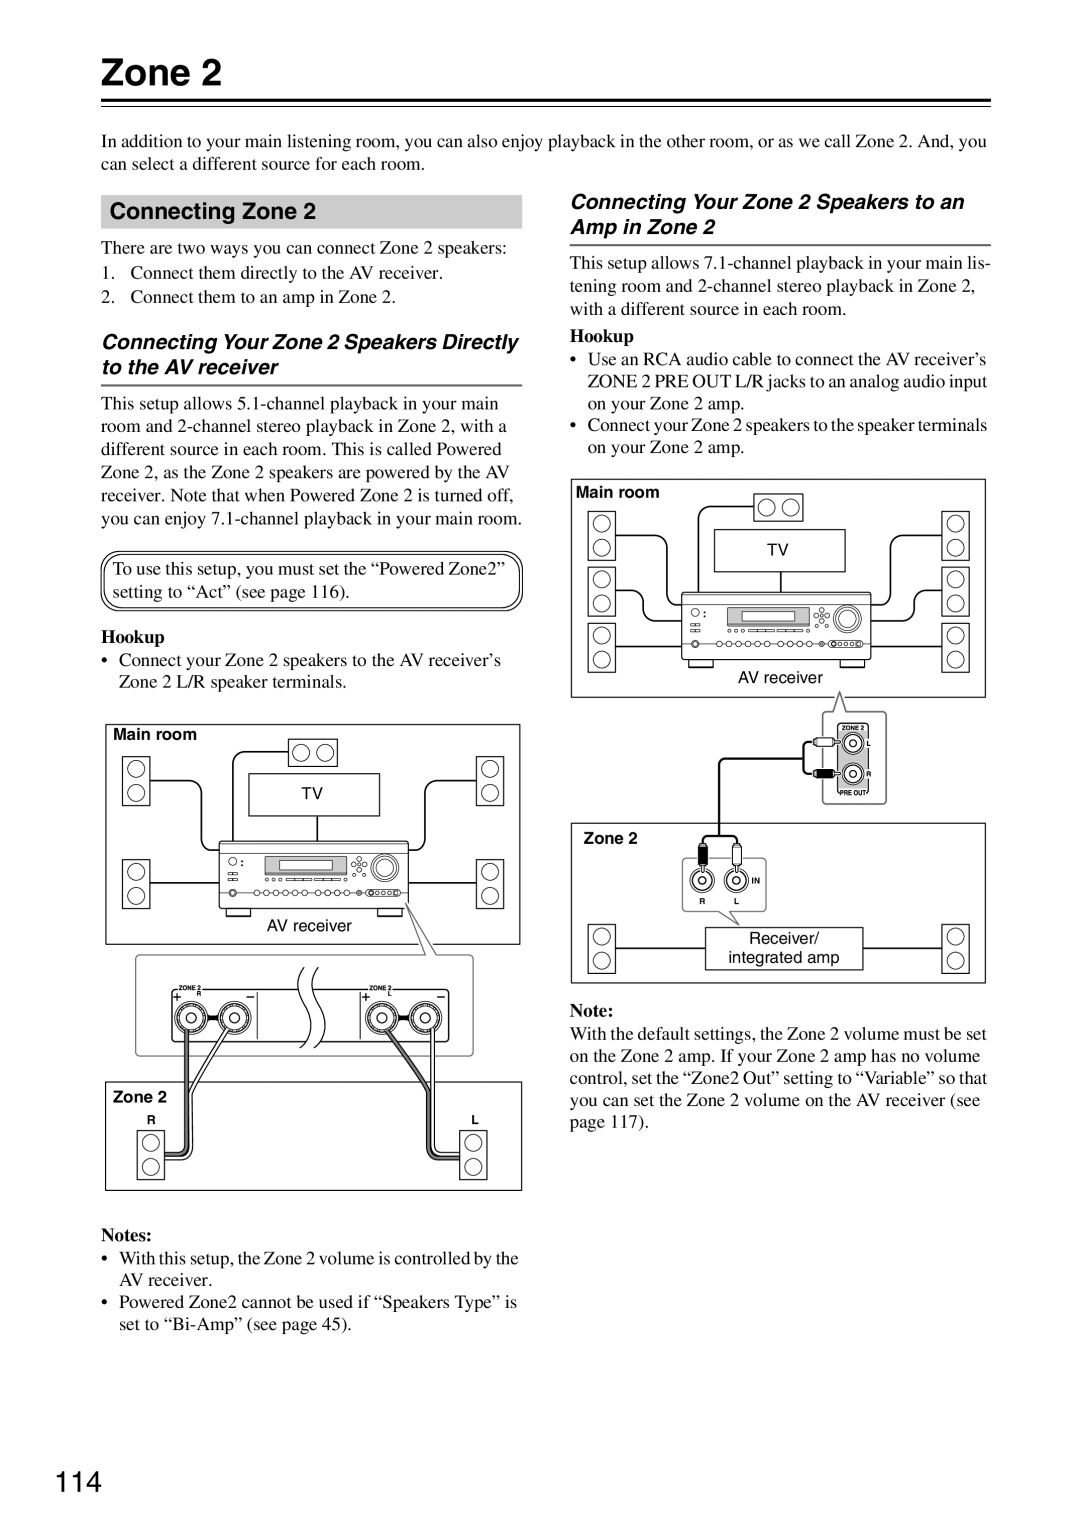 Onkyo DTR-7.9 instruction manual Connecting Zone, Connecting Your Zone 2 Speakers to an Amp in Zone, Hookup, Notes 